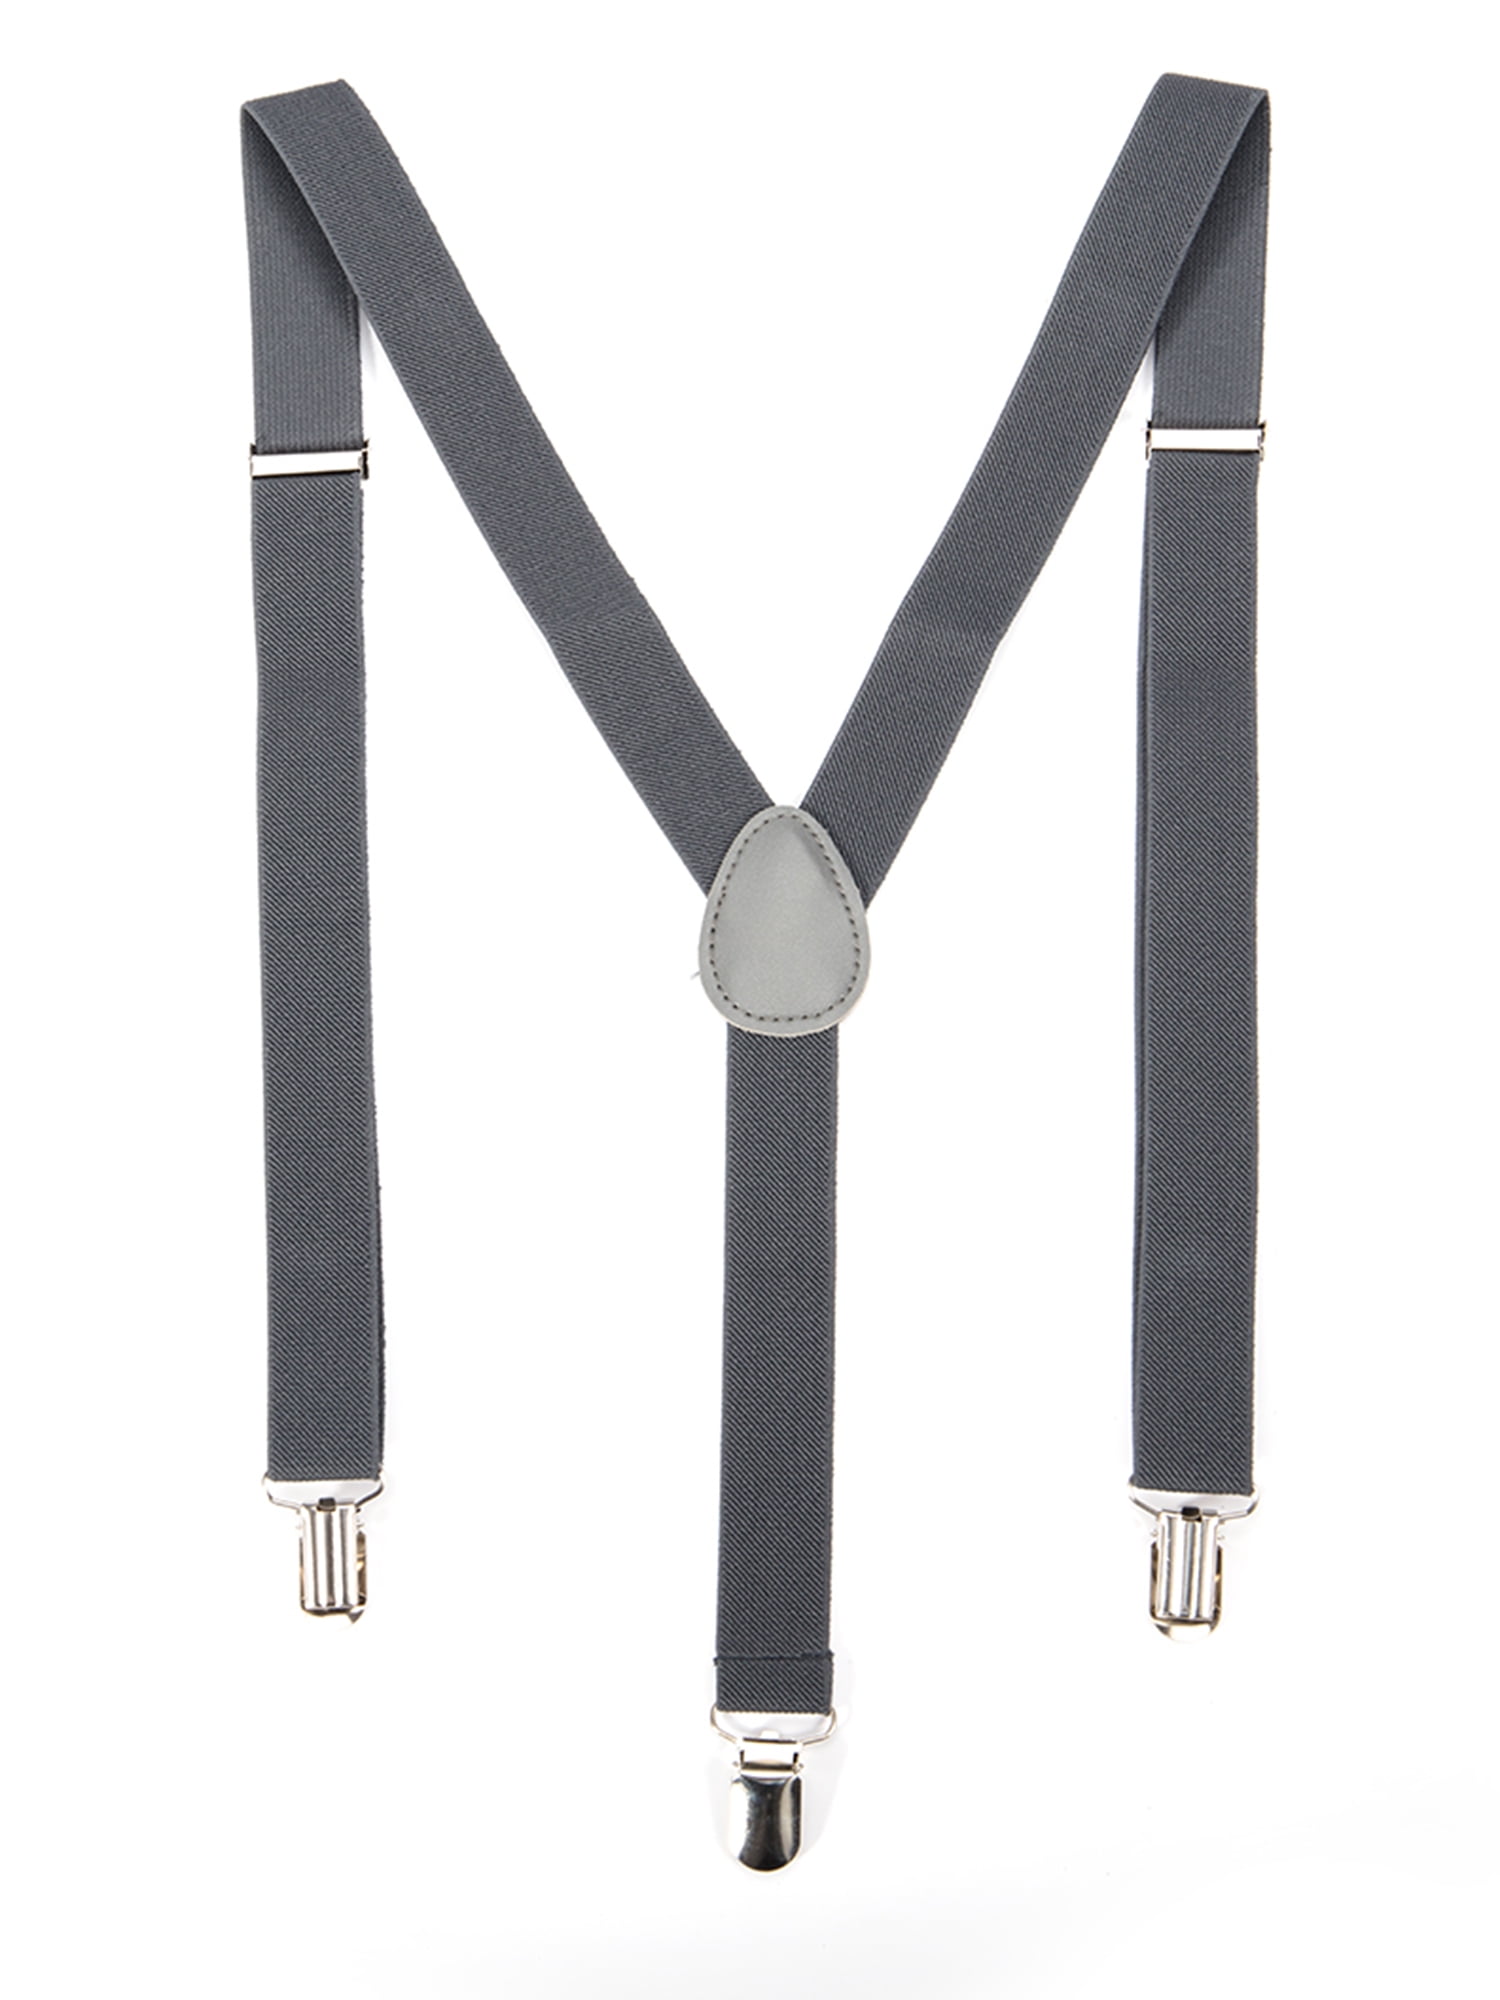 Details about   Decalen Mens Braces with Very Strong Clips Heavy Duty Suspenders One Size Fits Y 